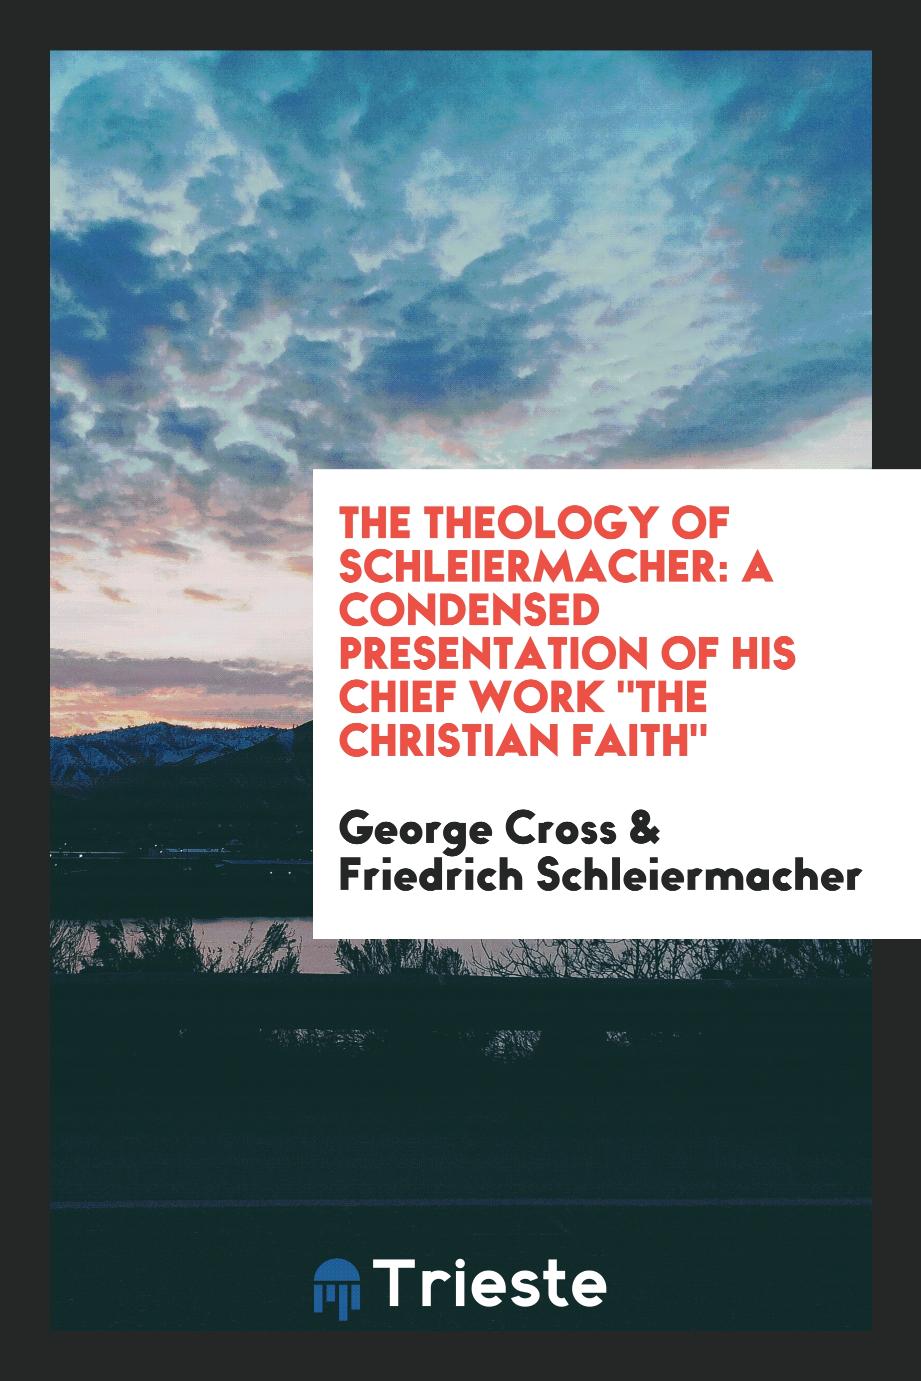 The Theology of Schleiermacher: A Condensed Presentation of His Chief Work "The Christian Faith"